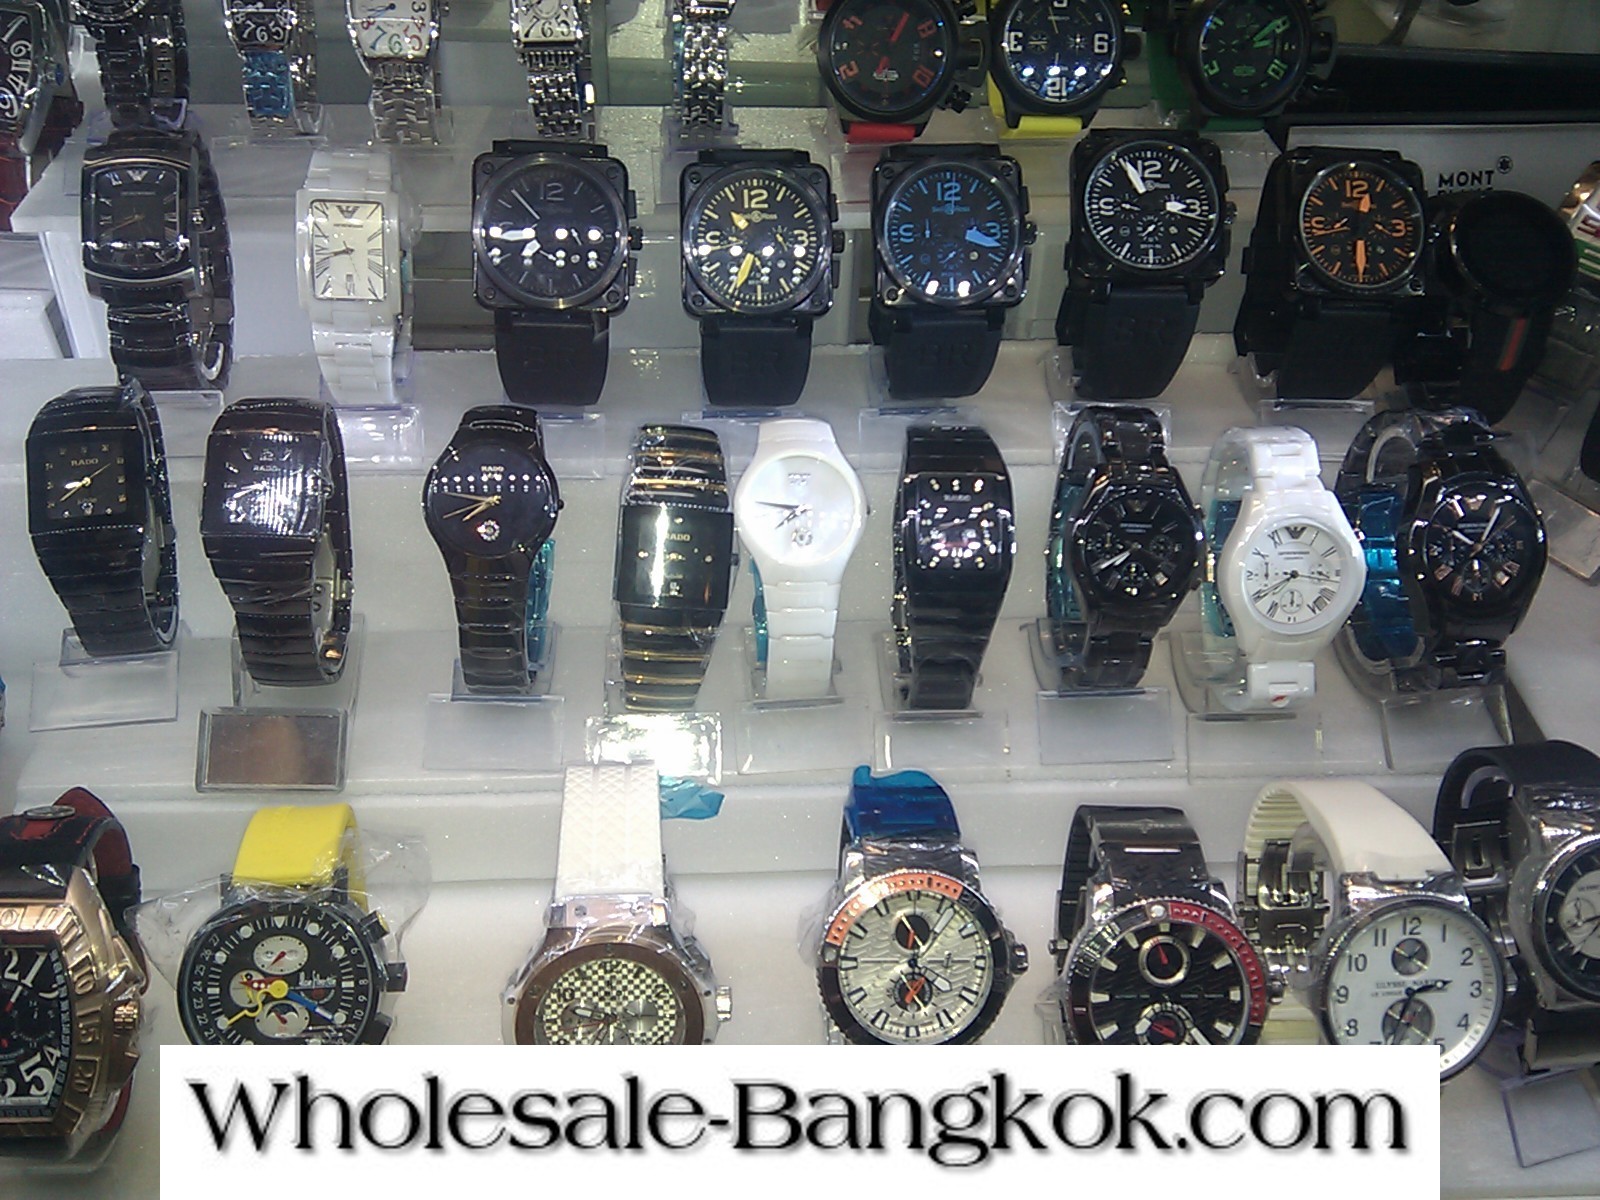 CHOPARD WATCH FROM MBK MALL IN BANGKOK THAILAND (DIGITAL TIME SHOP)